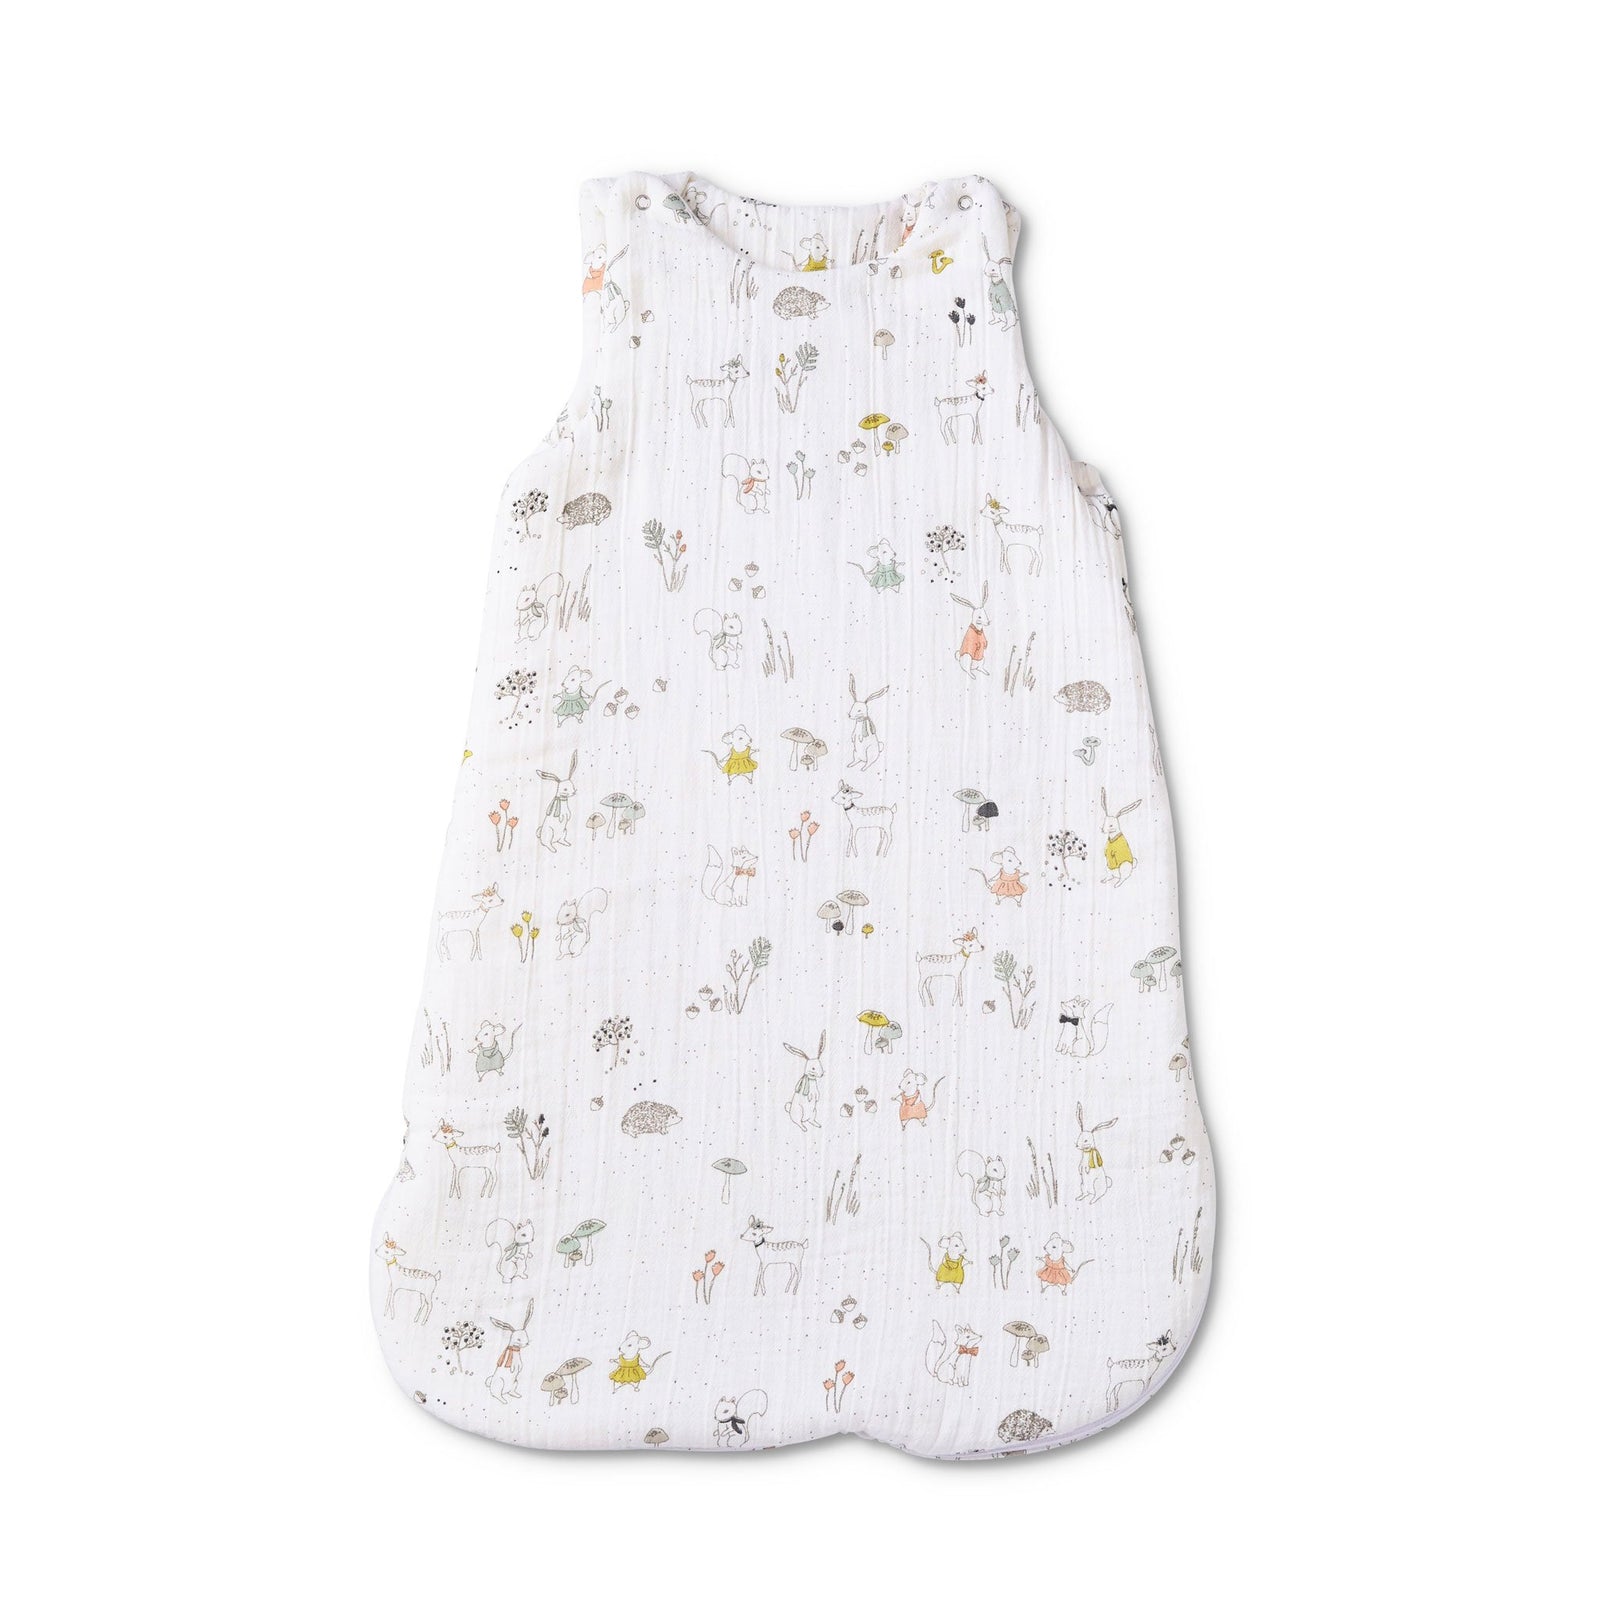 Pehr Magical Forest 1.0 TOG Sleep Bag. 100% organic muslin cotton. White with navy, marigold and rose tonal deer, squirrels, rabbits and forest foliage print.